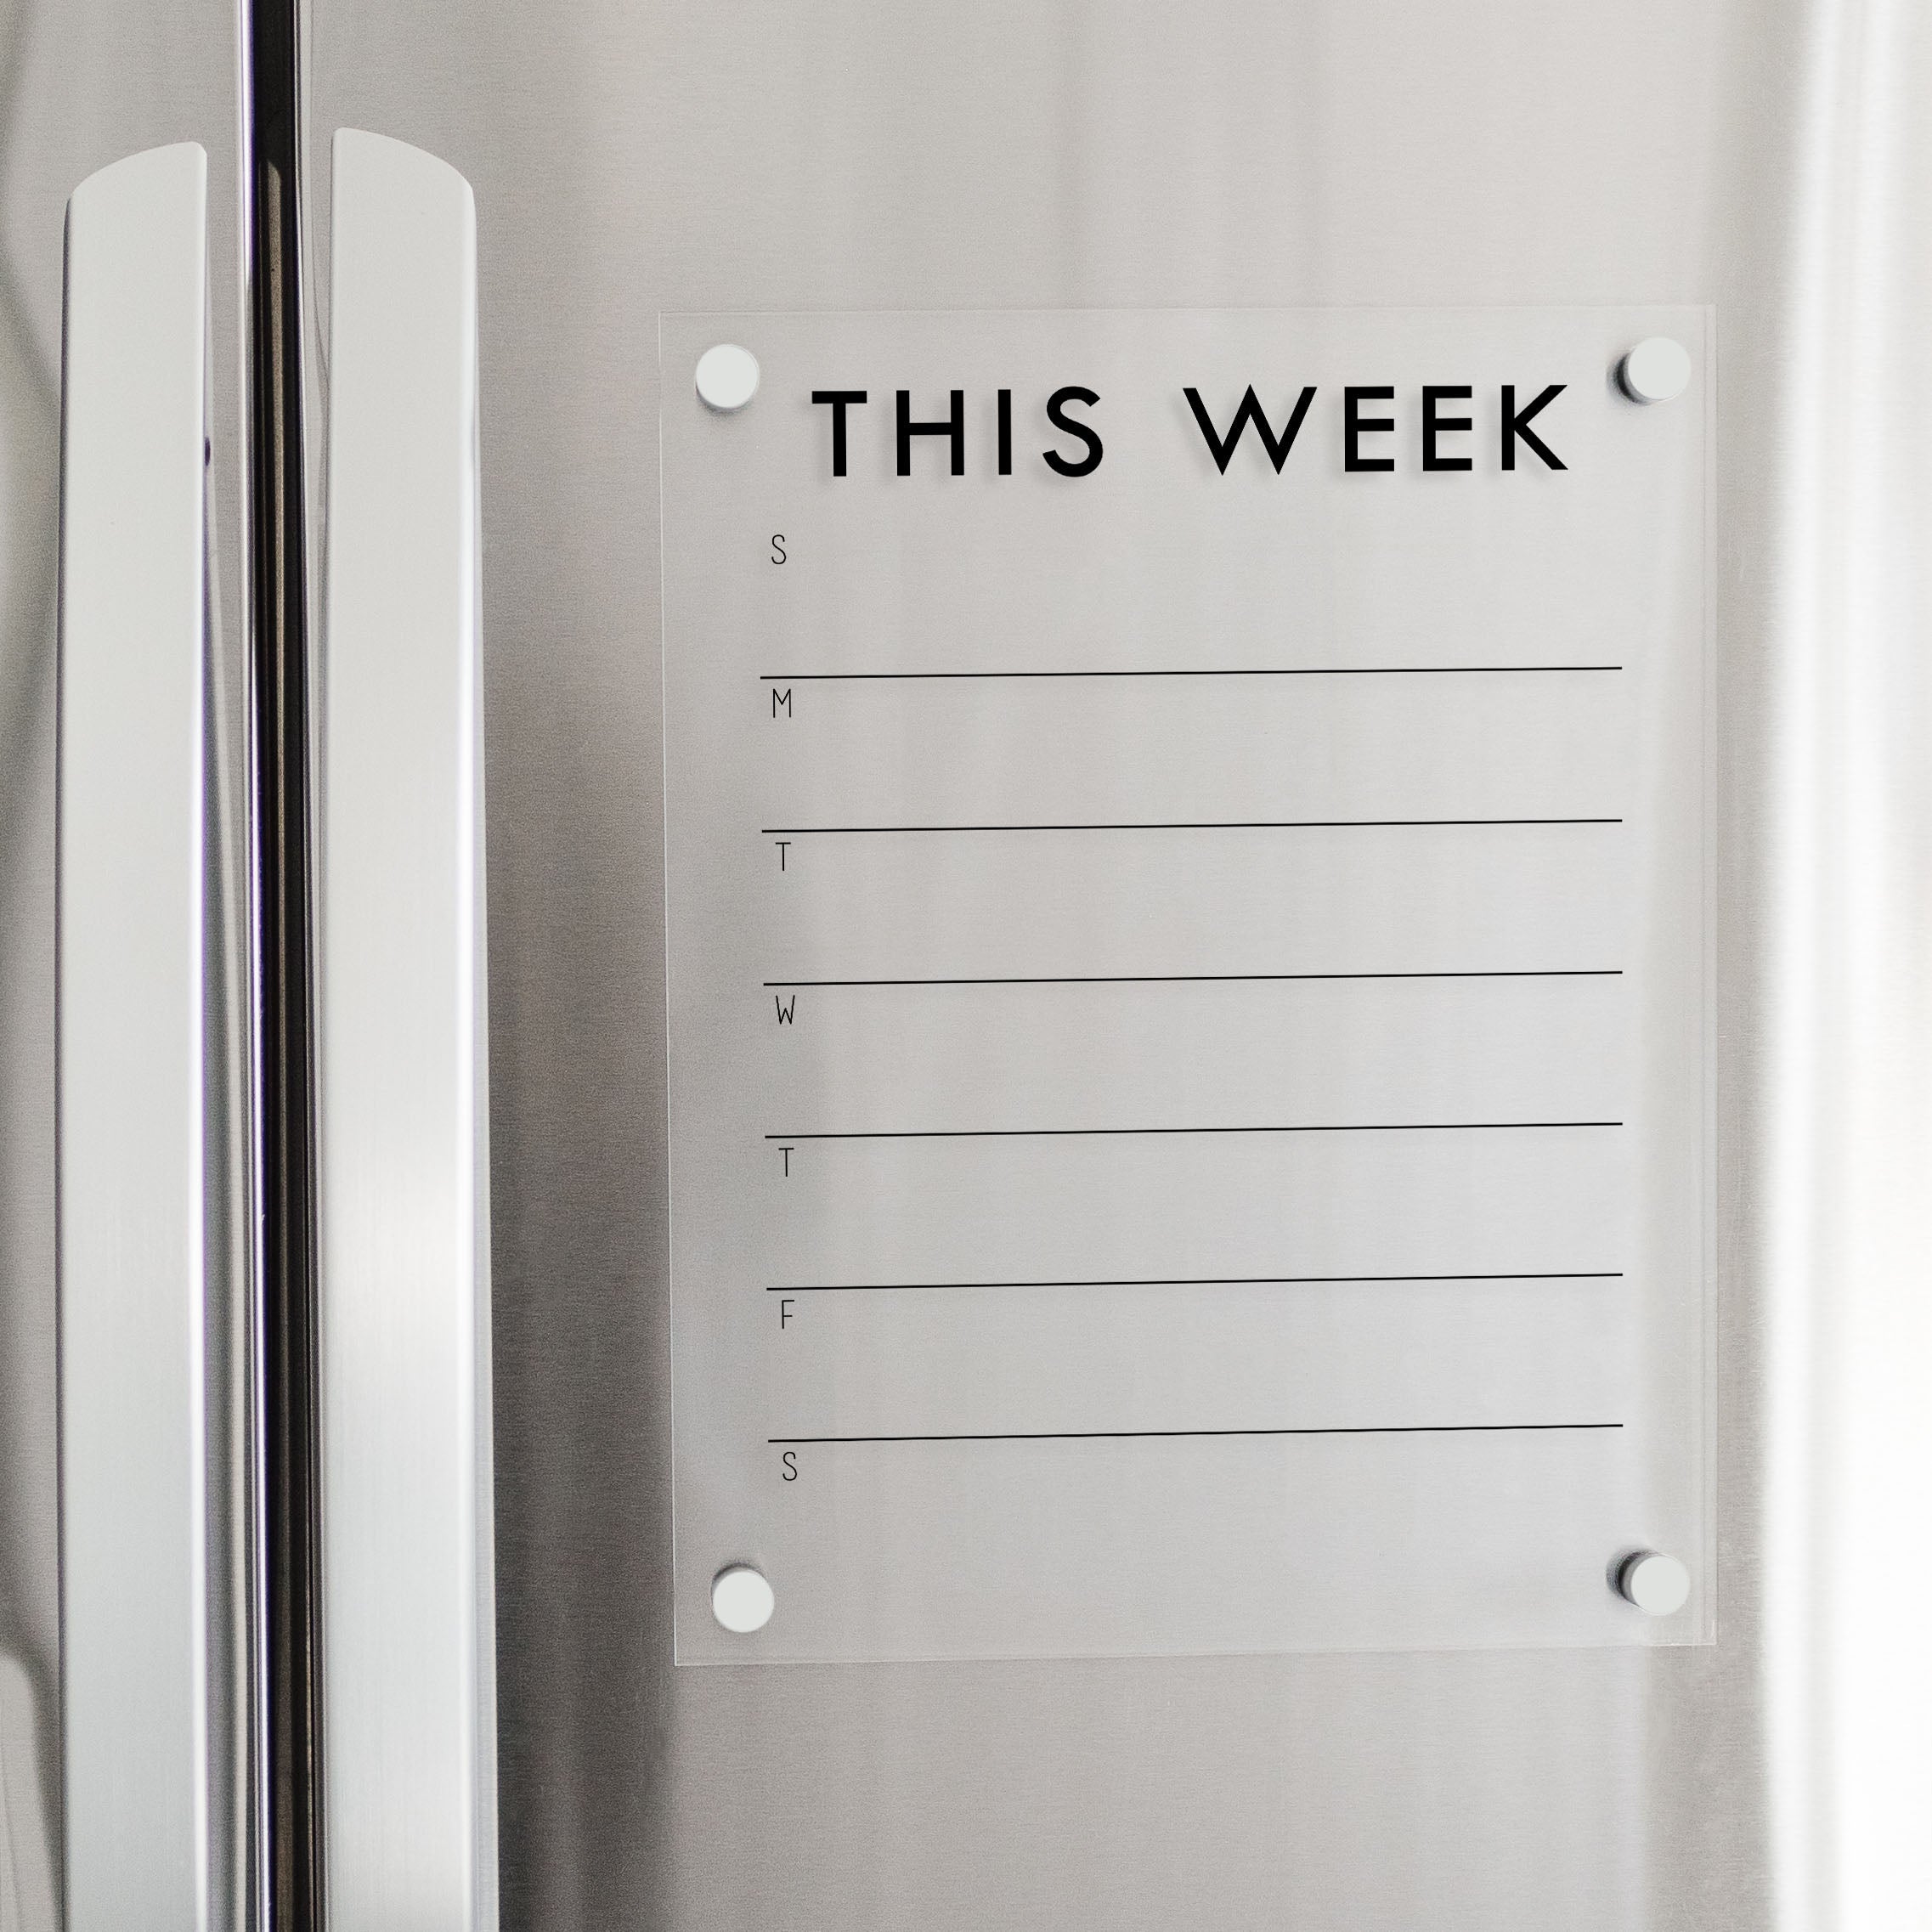 A Dry-erase weekly calender made of acrylic hanging on the fridge